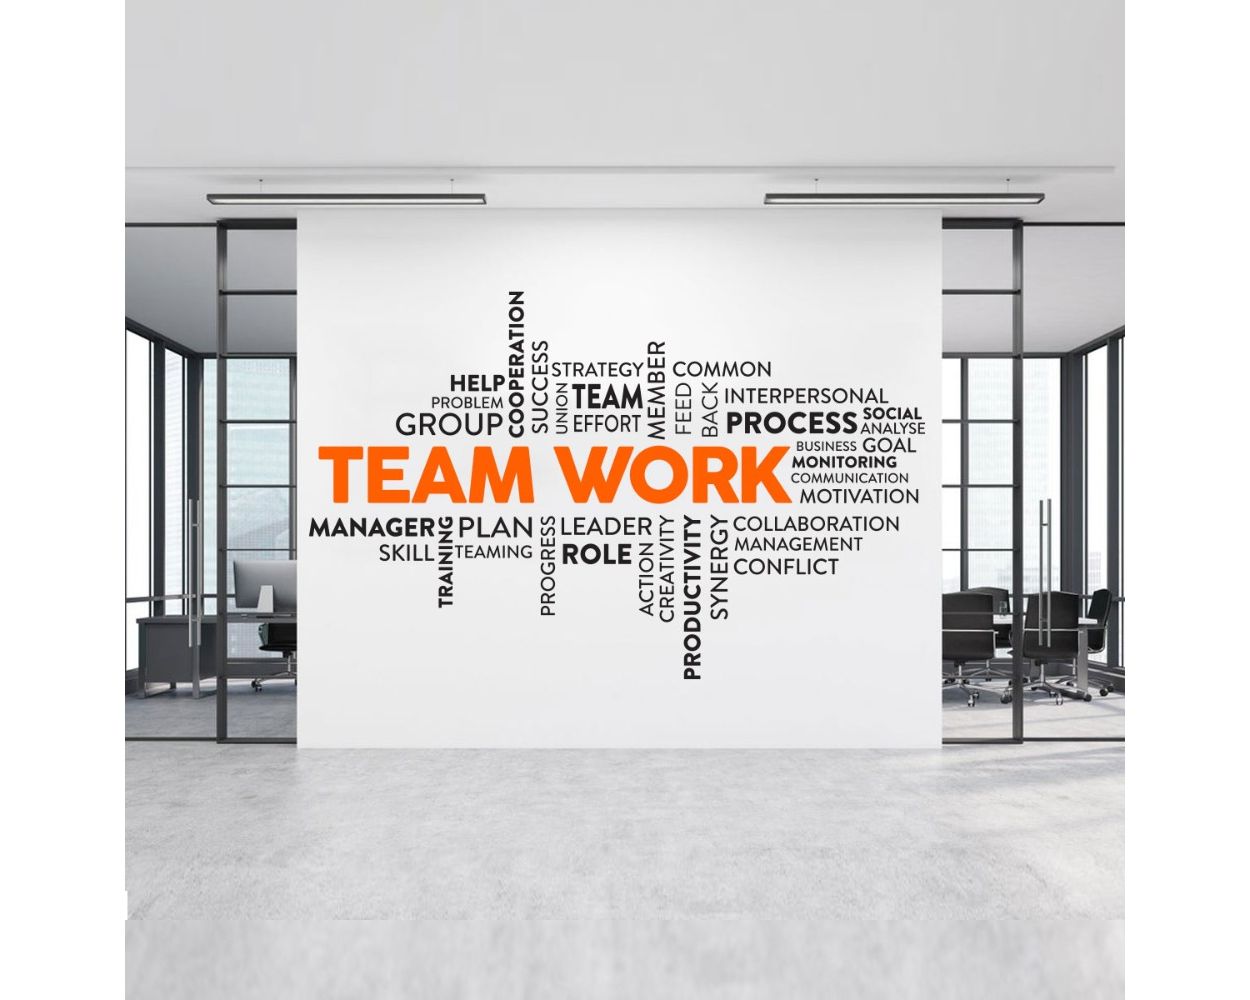 Teamwork Inspirational Quote Wall Decals for office motivational wall decor